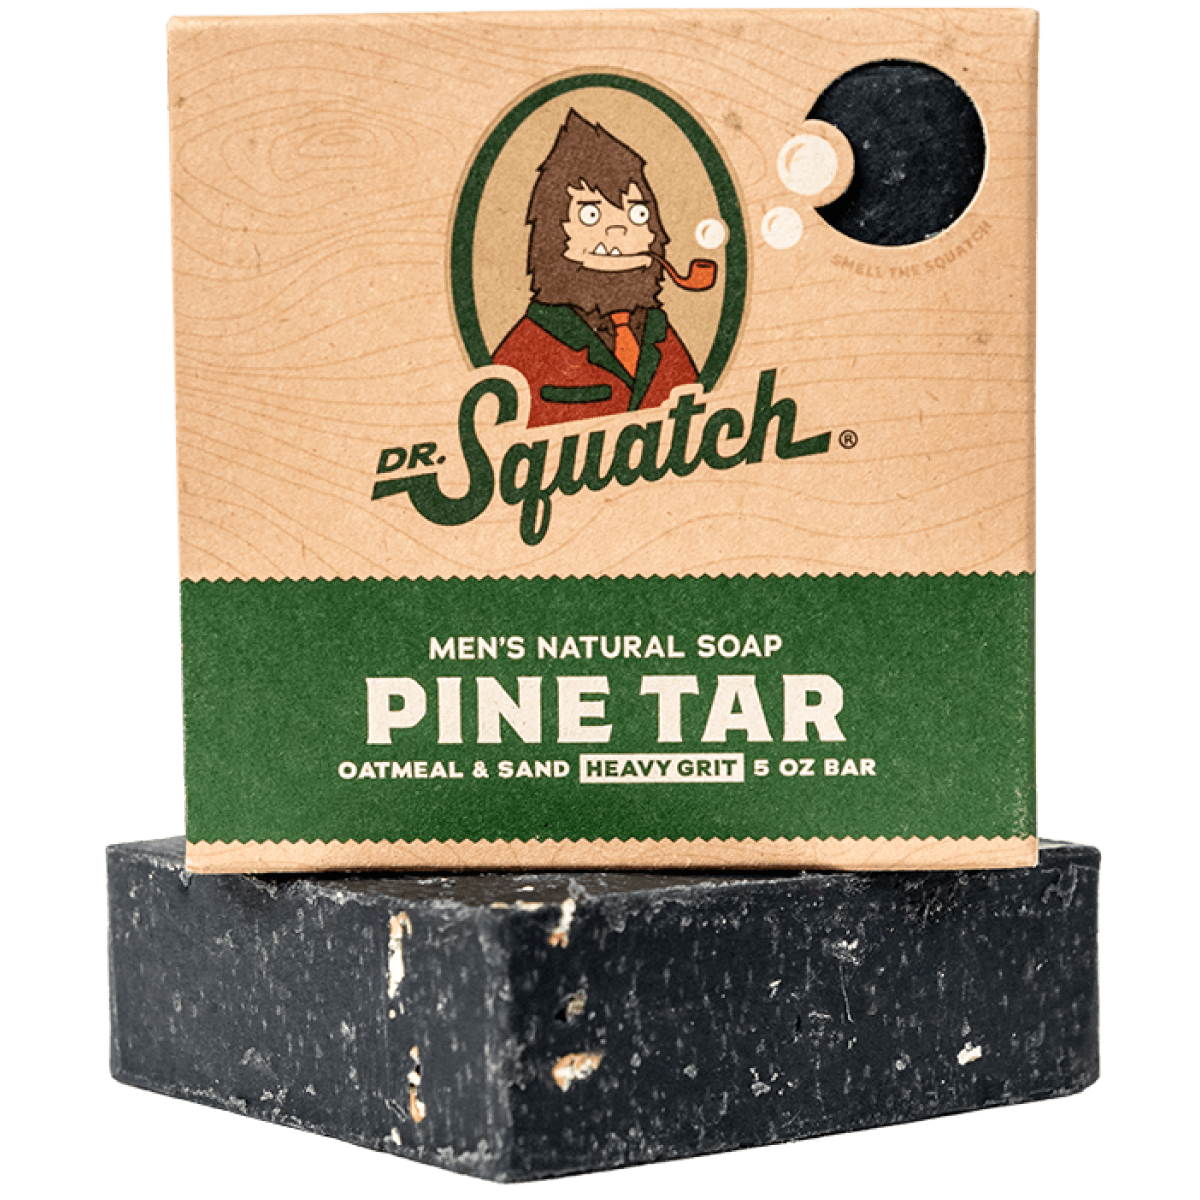 Dr Squatch WINTER LIMITED EDITION Soap | Snowy Pine Tar & Frosty Peppermint